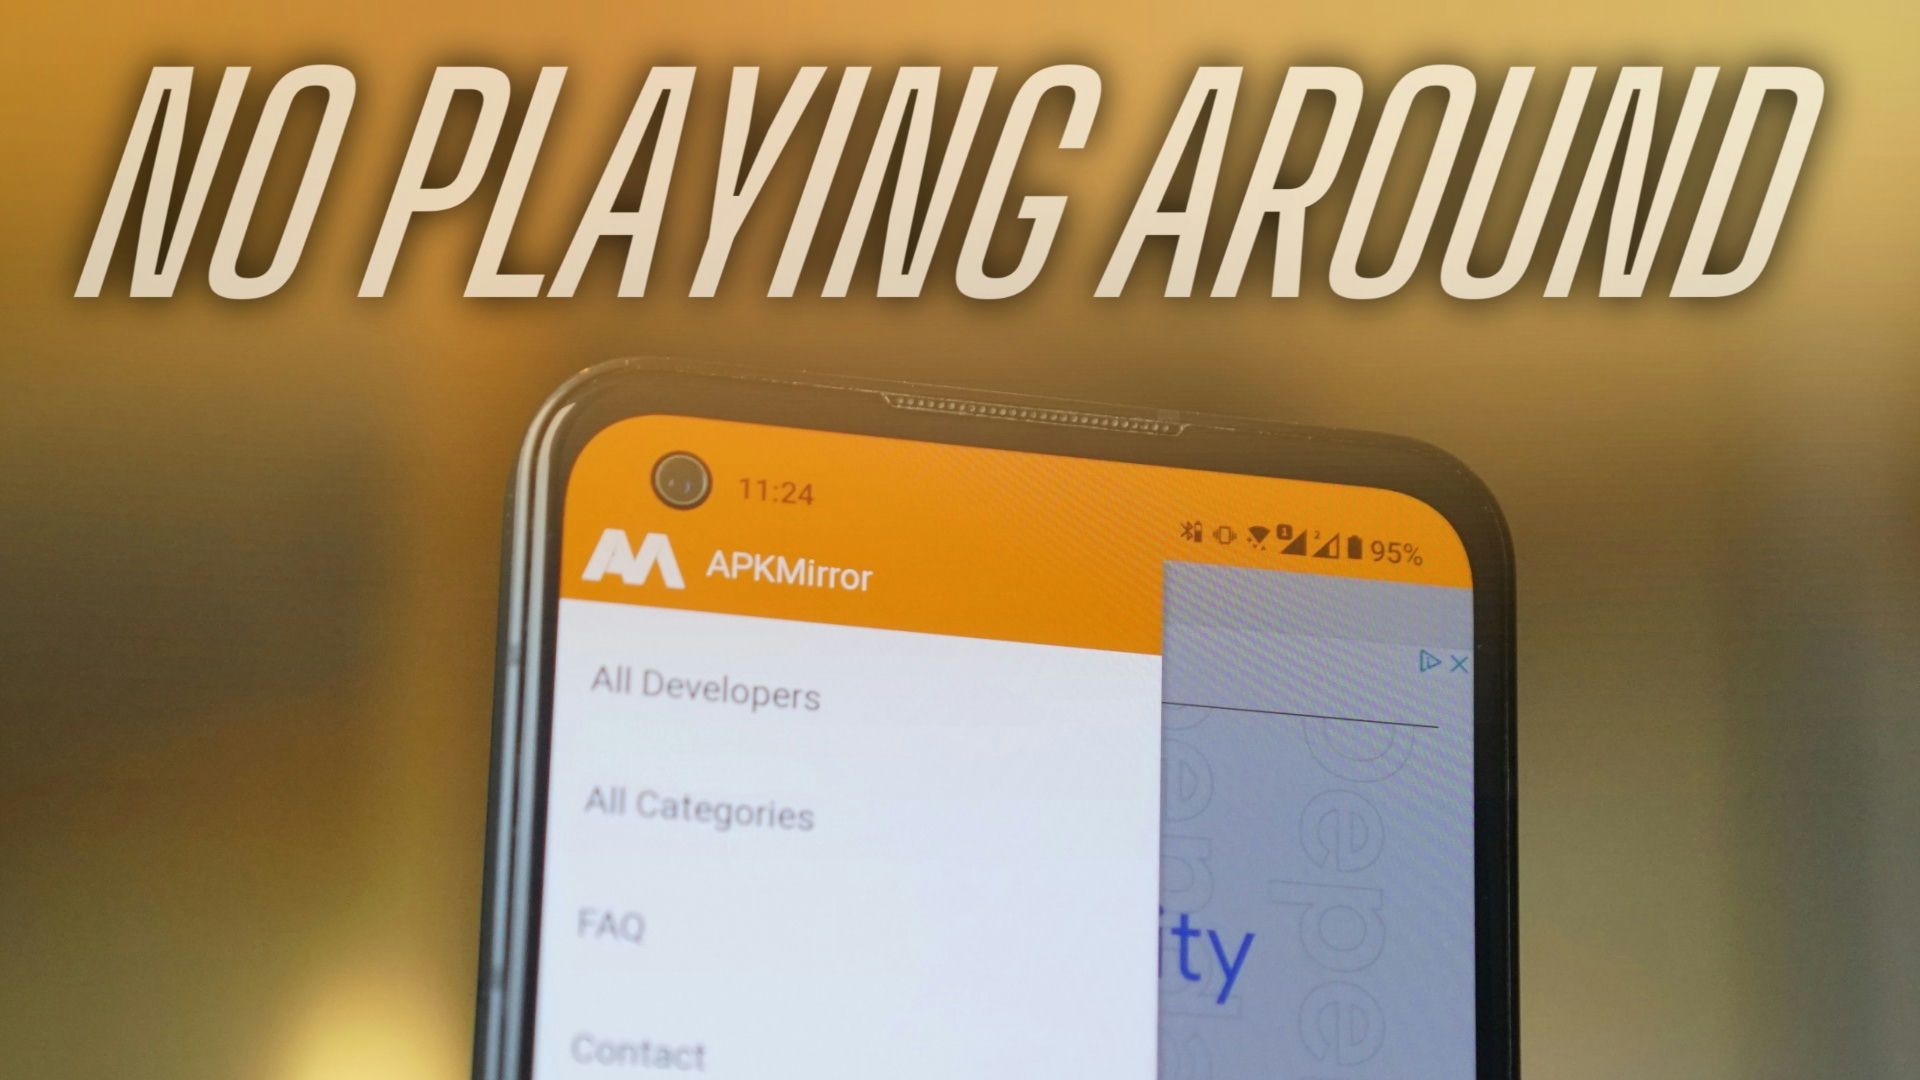 Never Ever (Ever) Download Android Apps Outside of Google Play